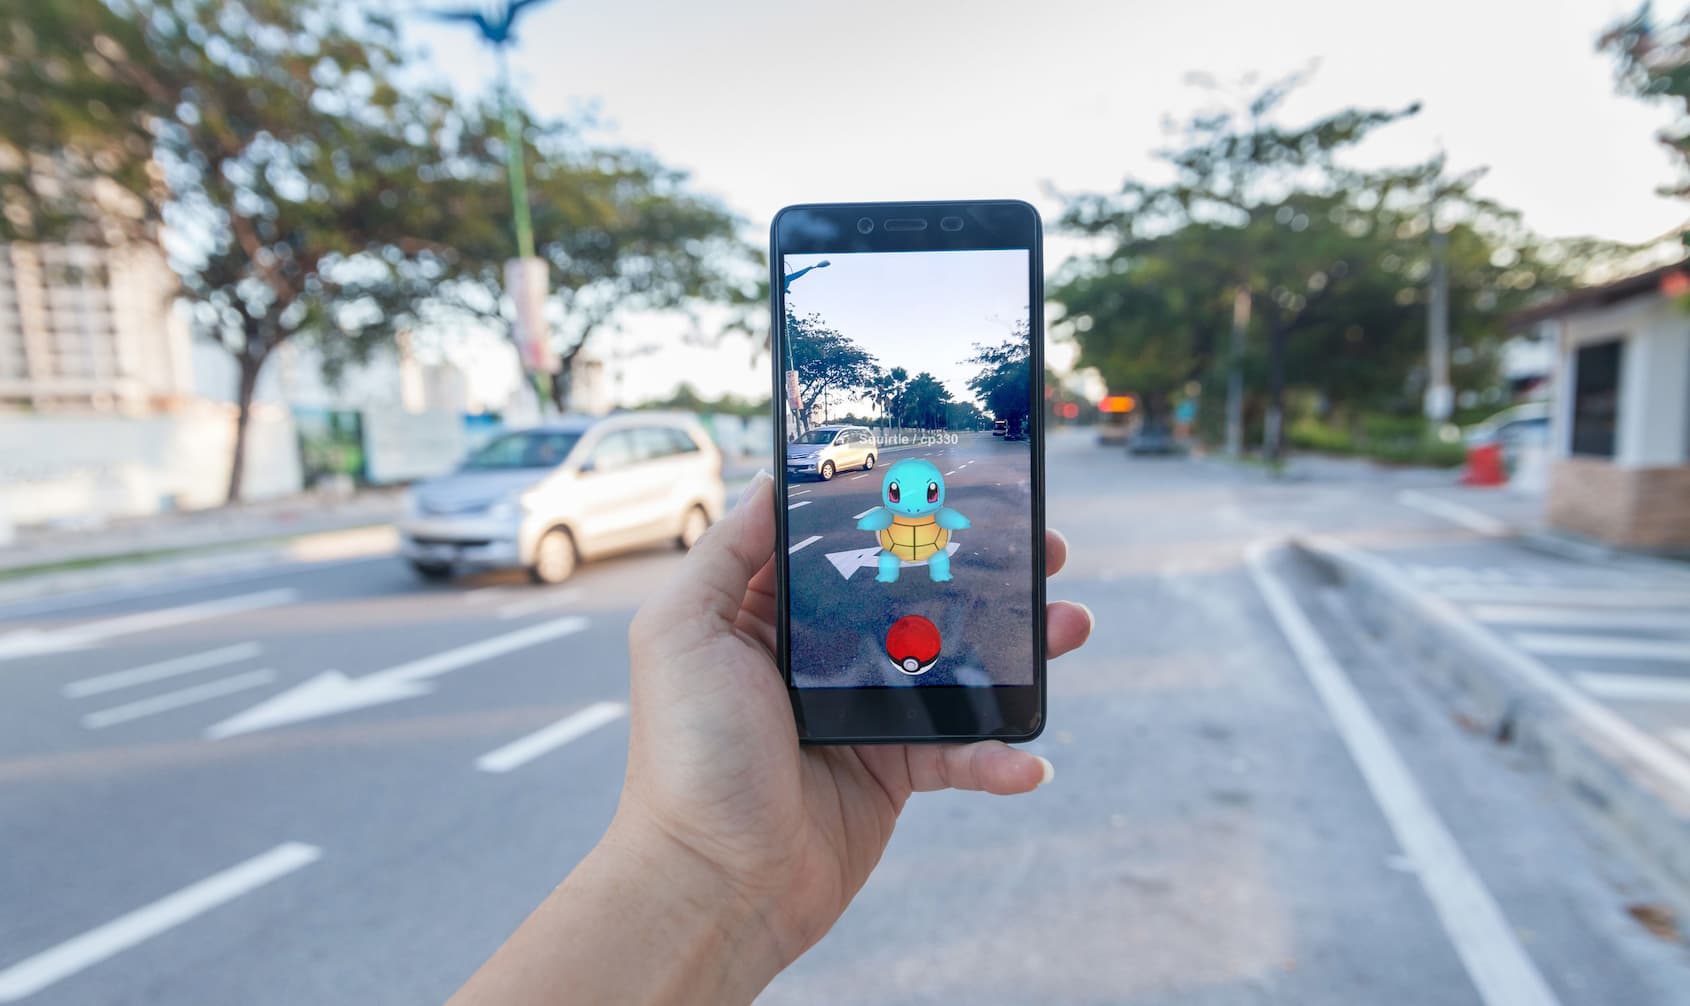 Pokemon Go as an example of the application of Augmented Reality (AR) technology